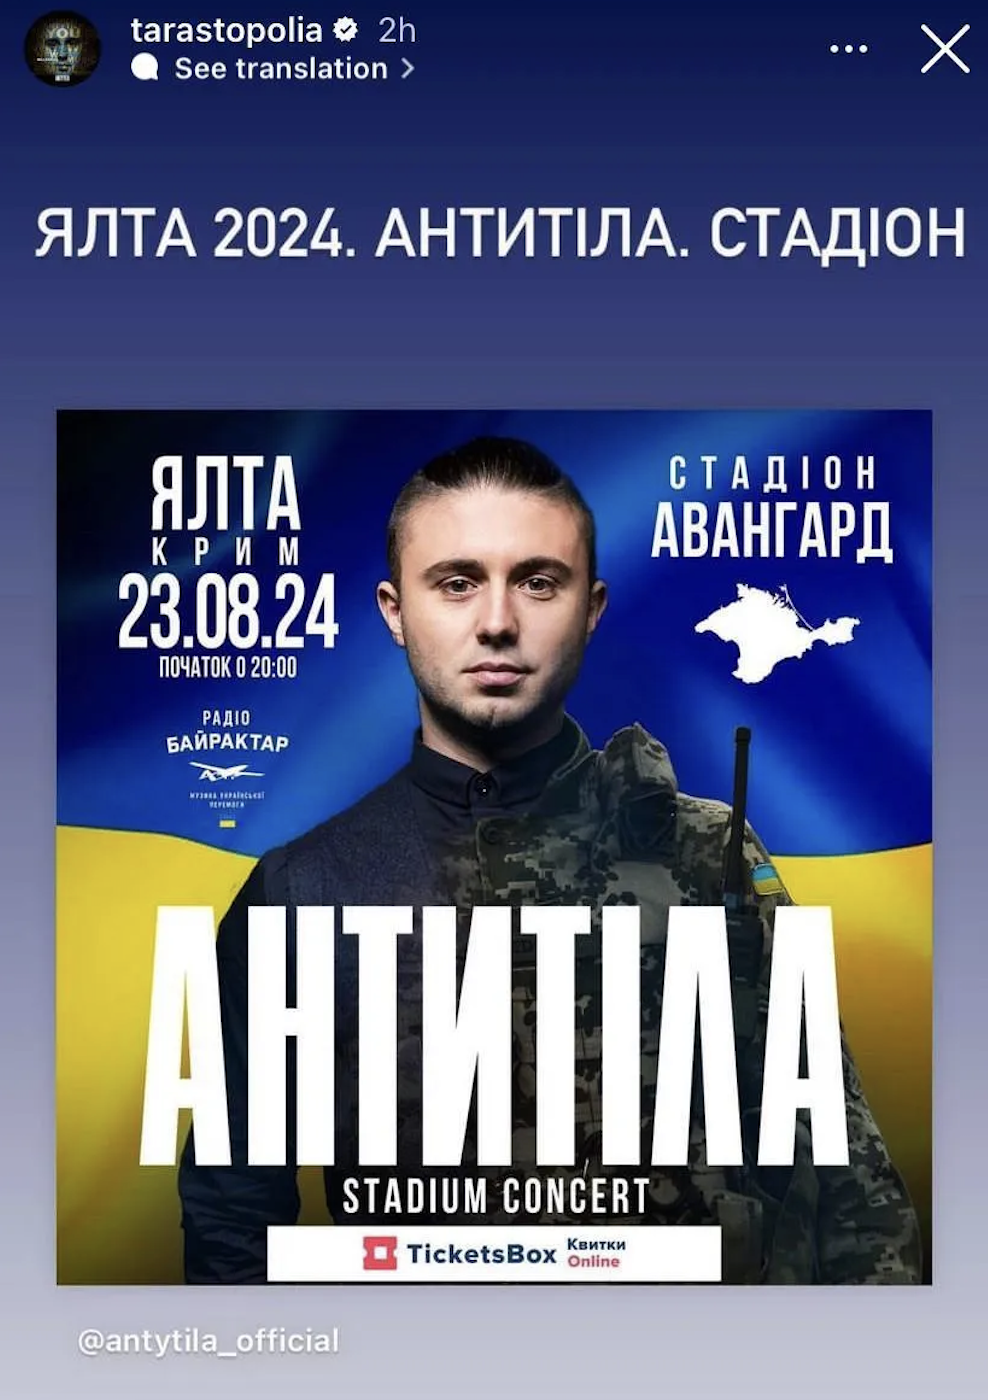 Taras Topolia explains the announcement of Antytila's concert in Crimea on August 23, 2024: Kyiv was supposed to fall in a week. It didn't happen, it was magic